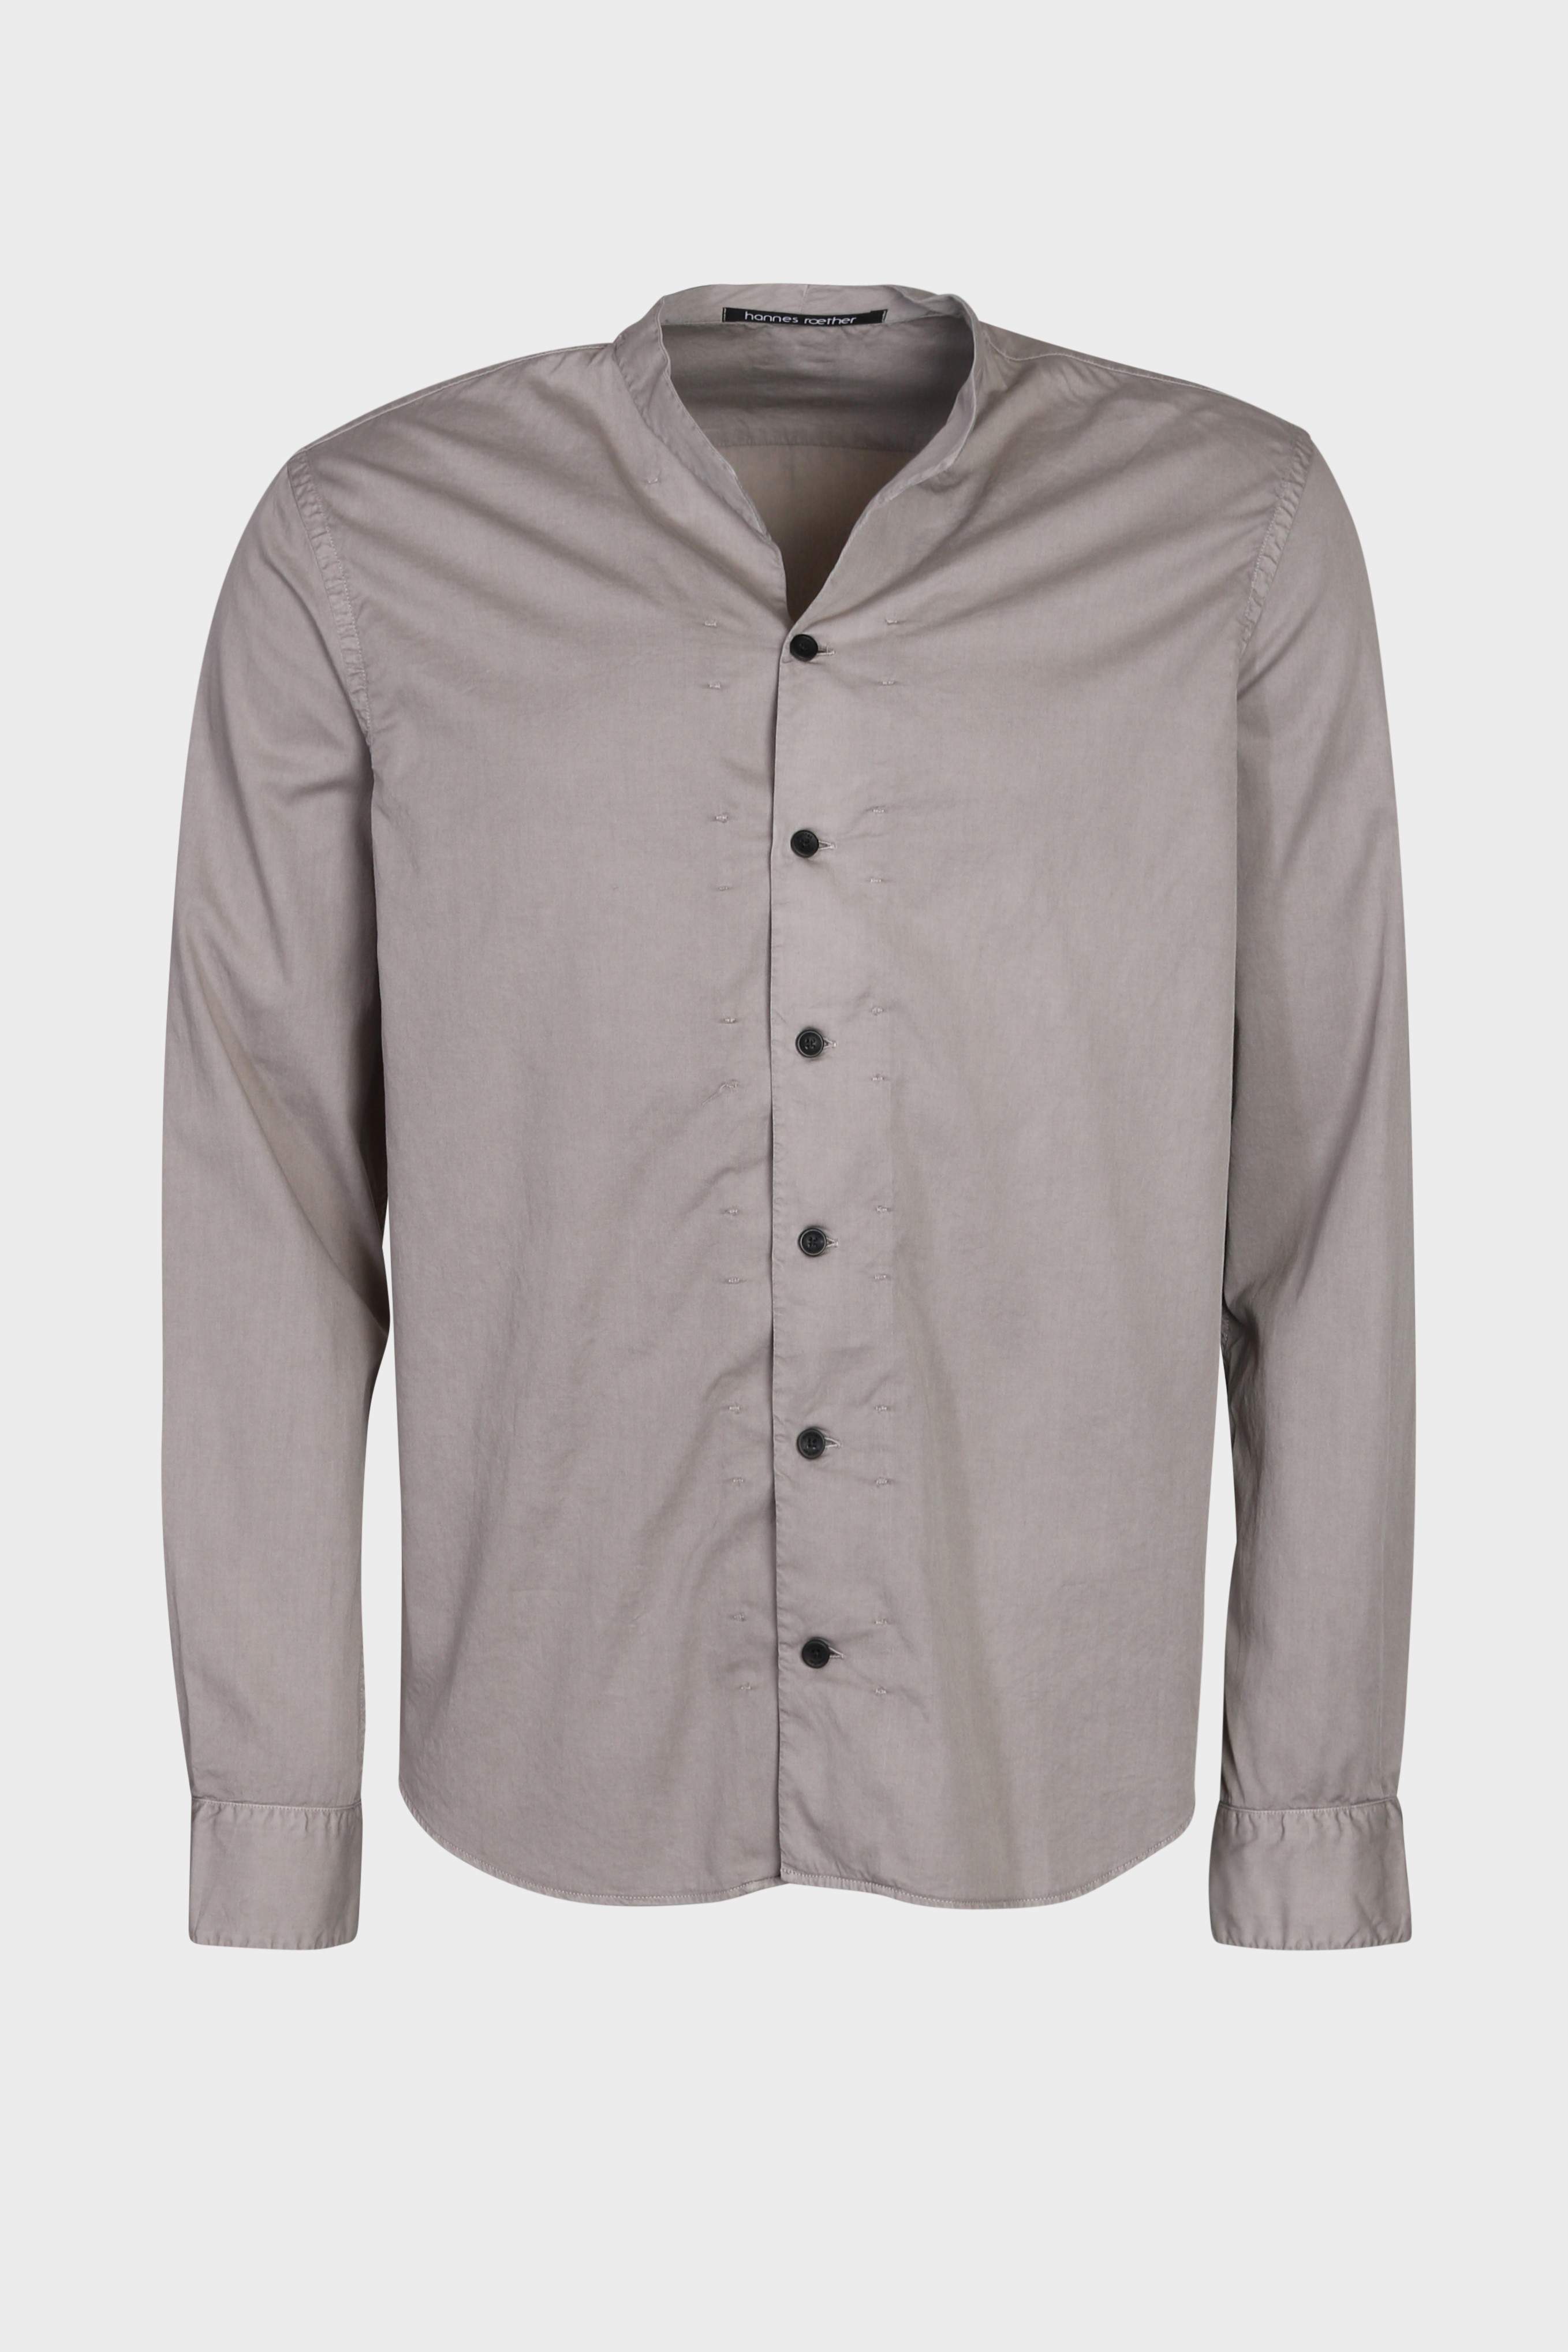 HANNES ROETHER Cotton Shirt in Taupe M